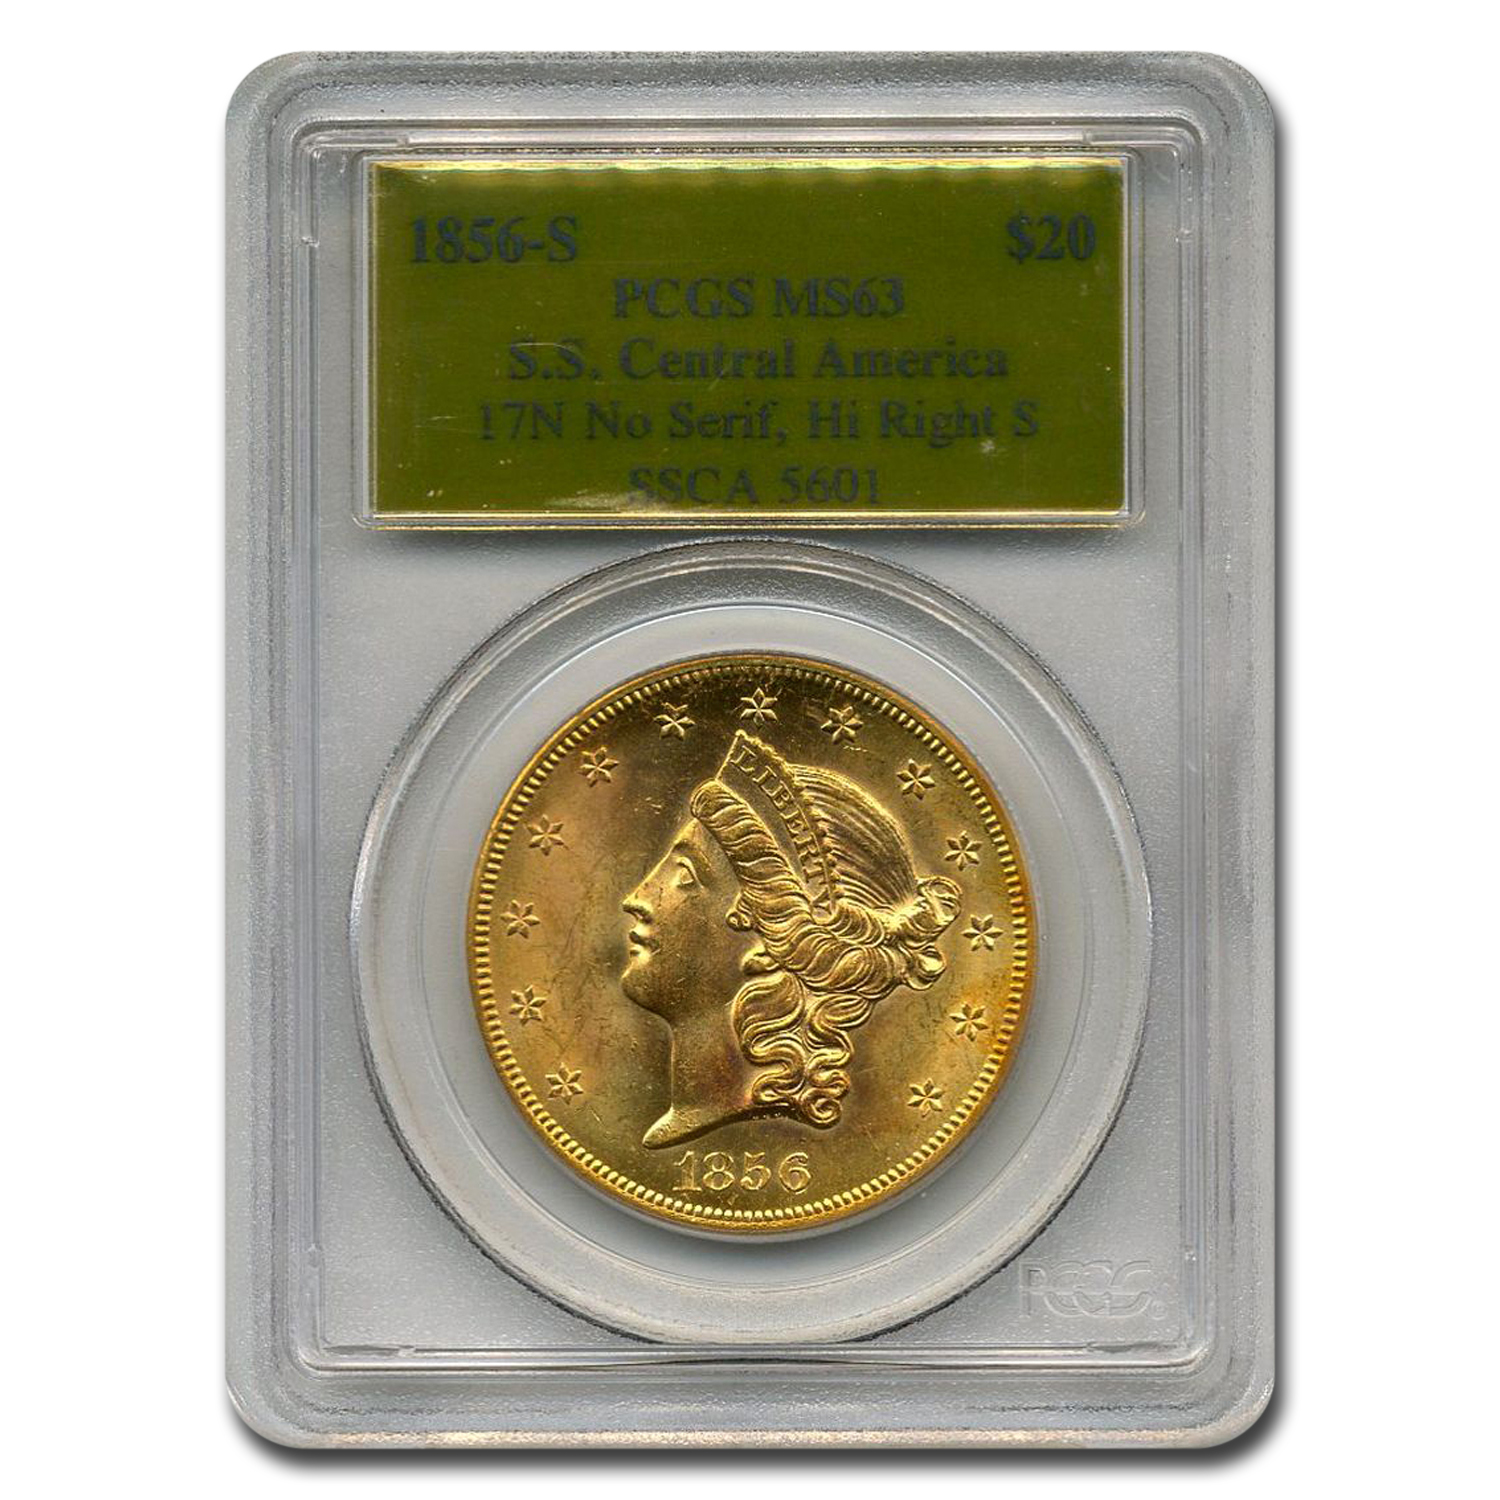 Buy 1856-S $20 Liberty Gold Double Eagle MS-63 PCGS (Central America) - Click Image to Close